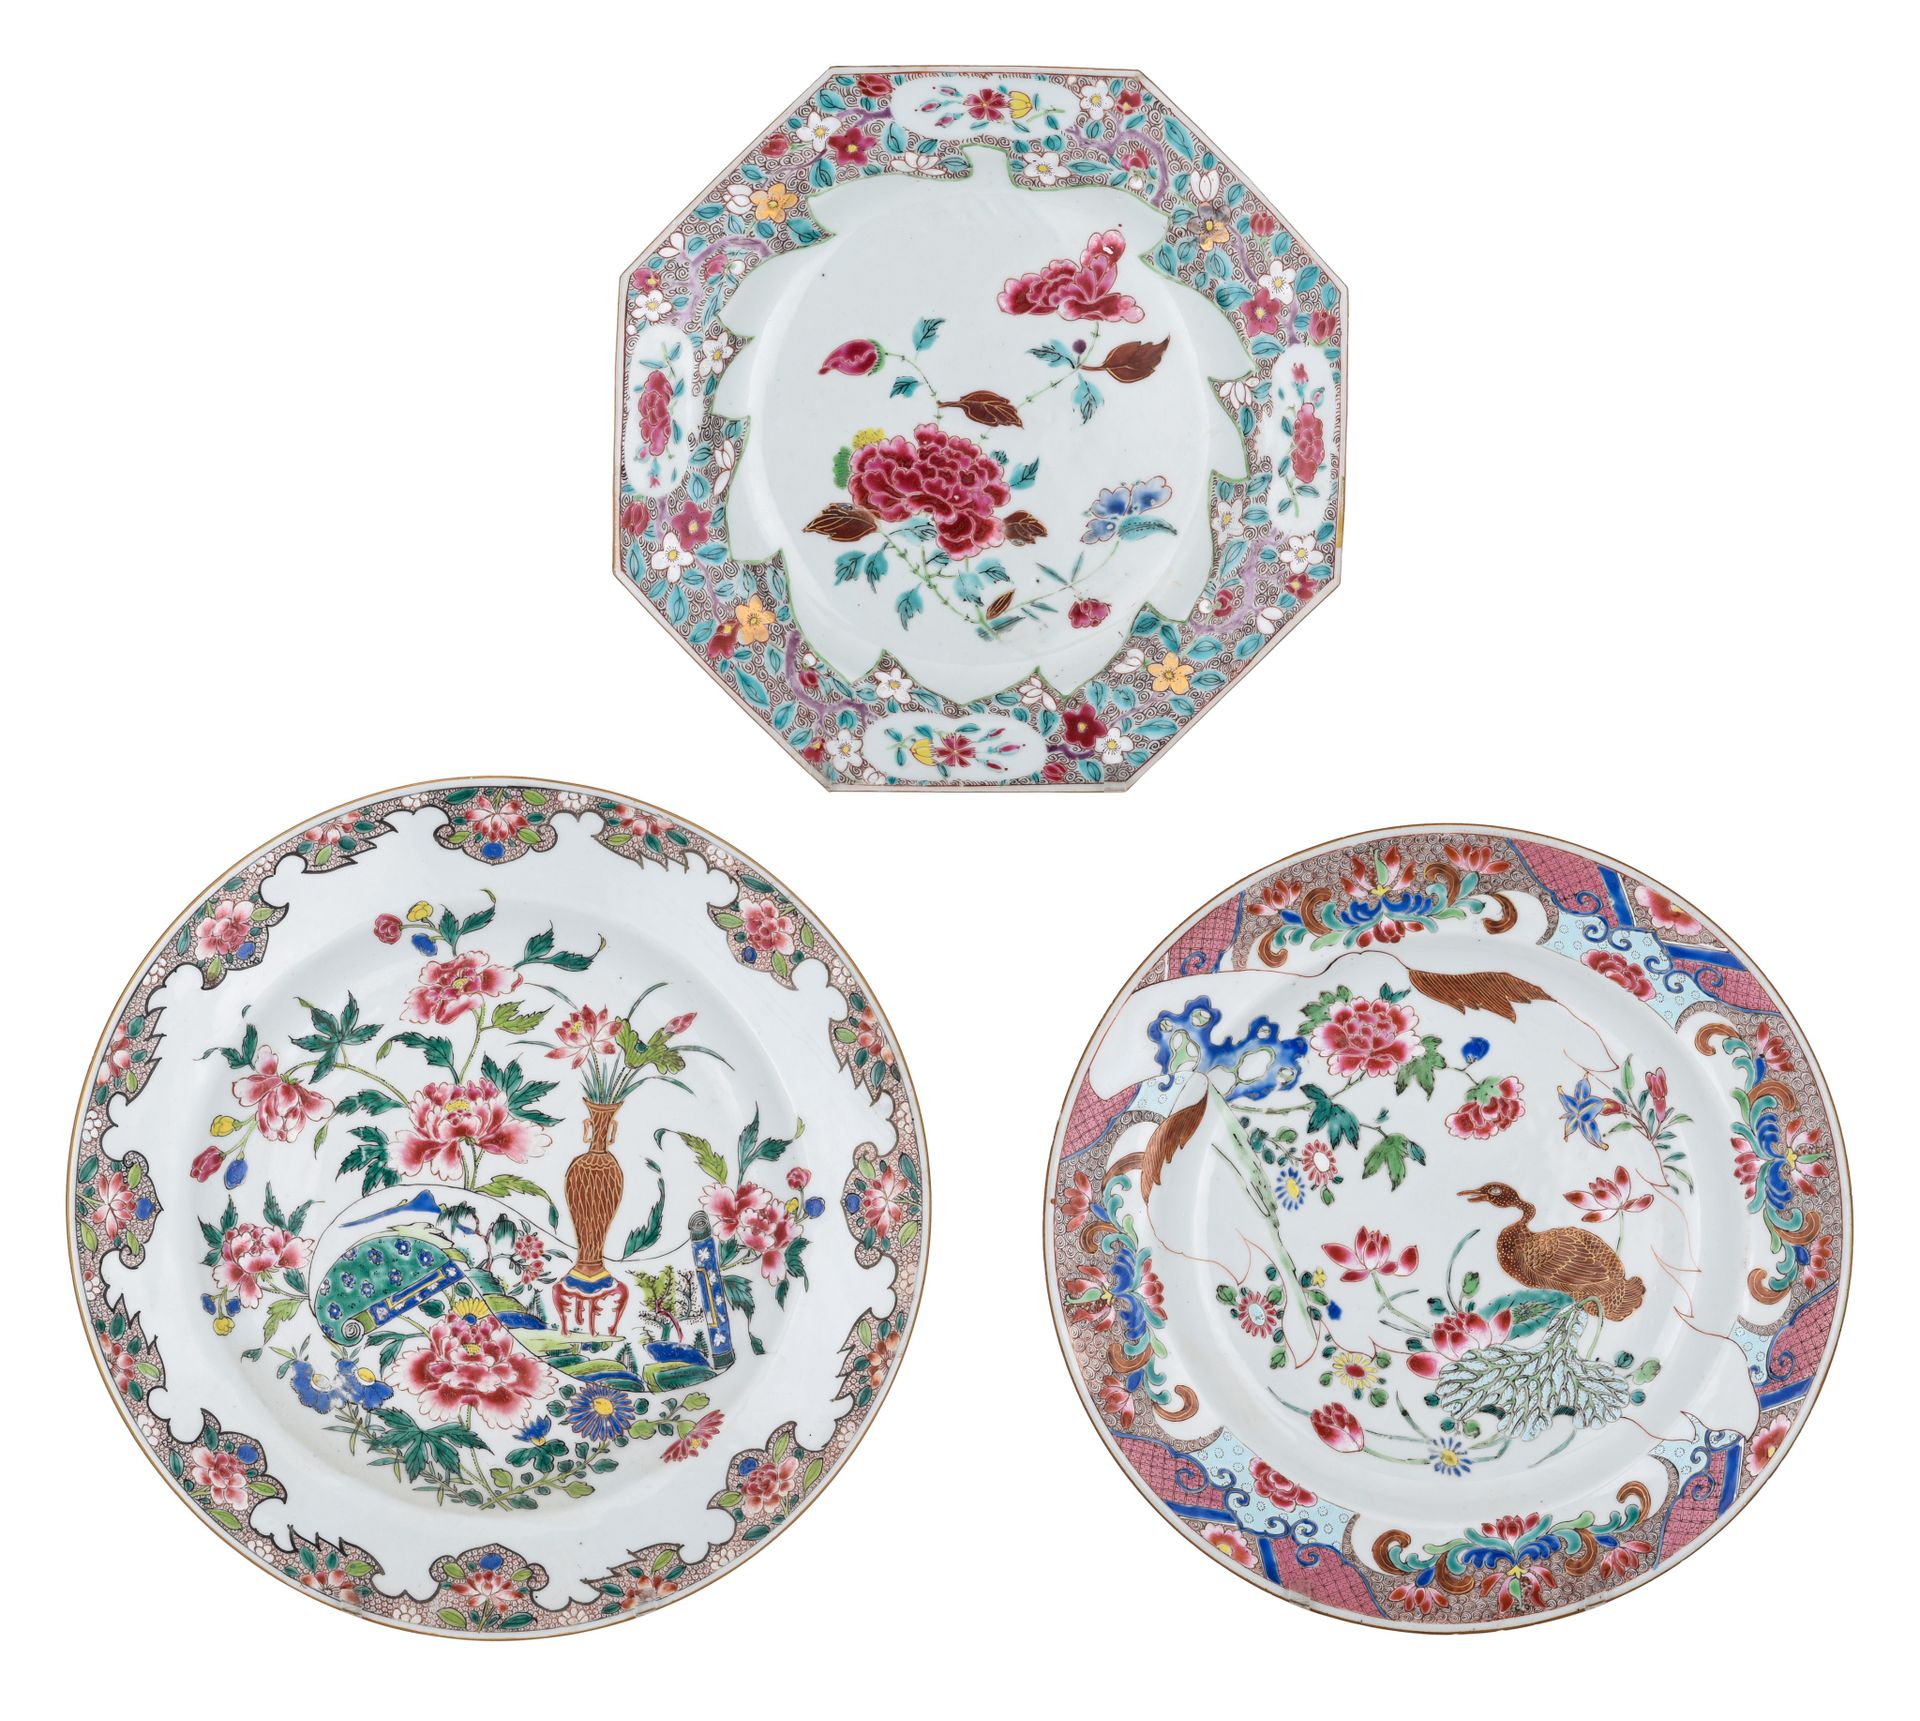 Three Chinese famille rose export porcelain plates, 18thC, dia. 29 - 35 cm Tres &hellip;